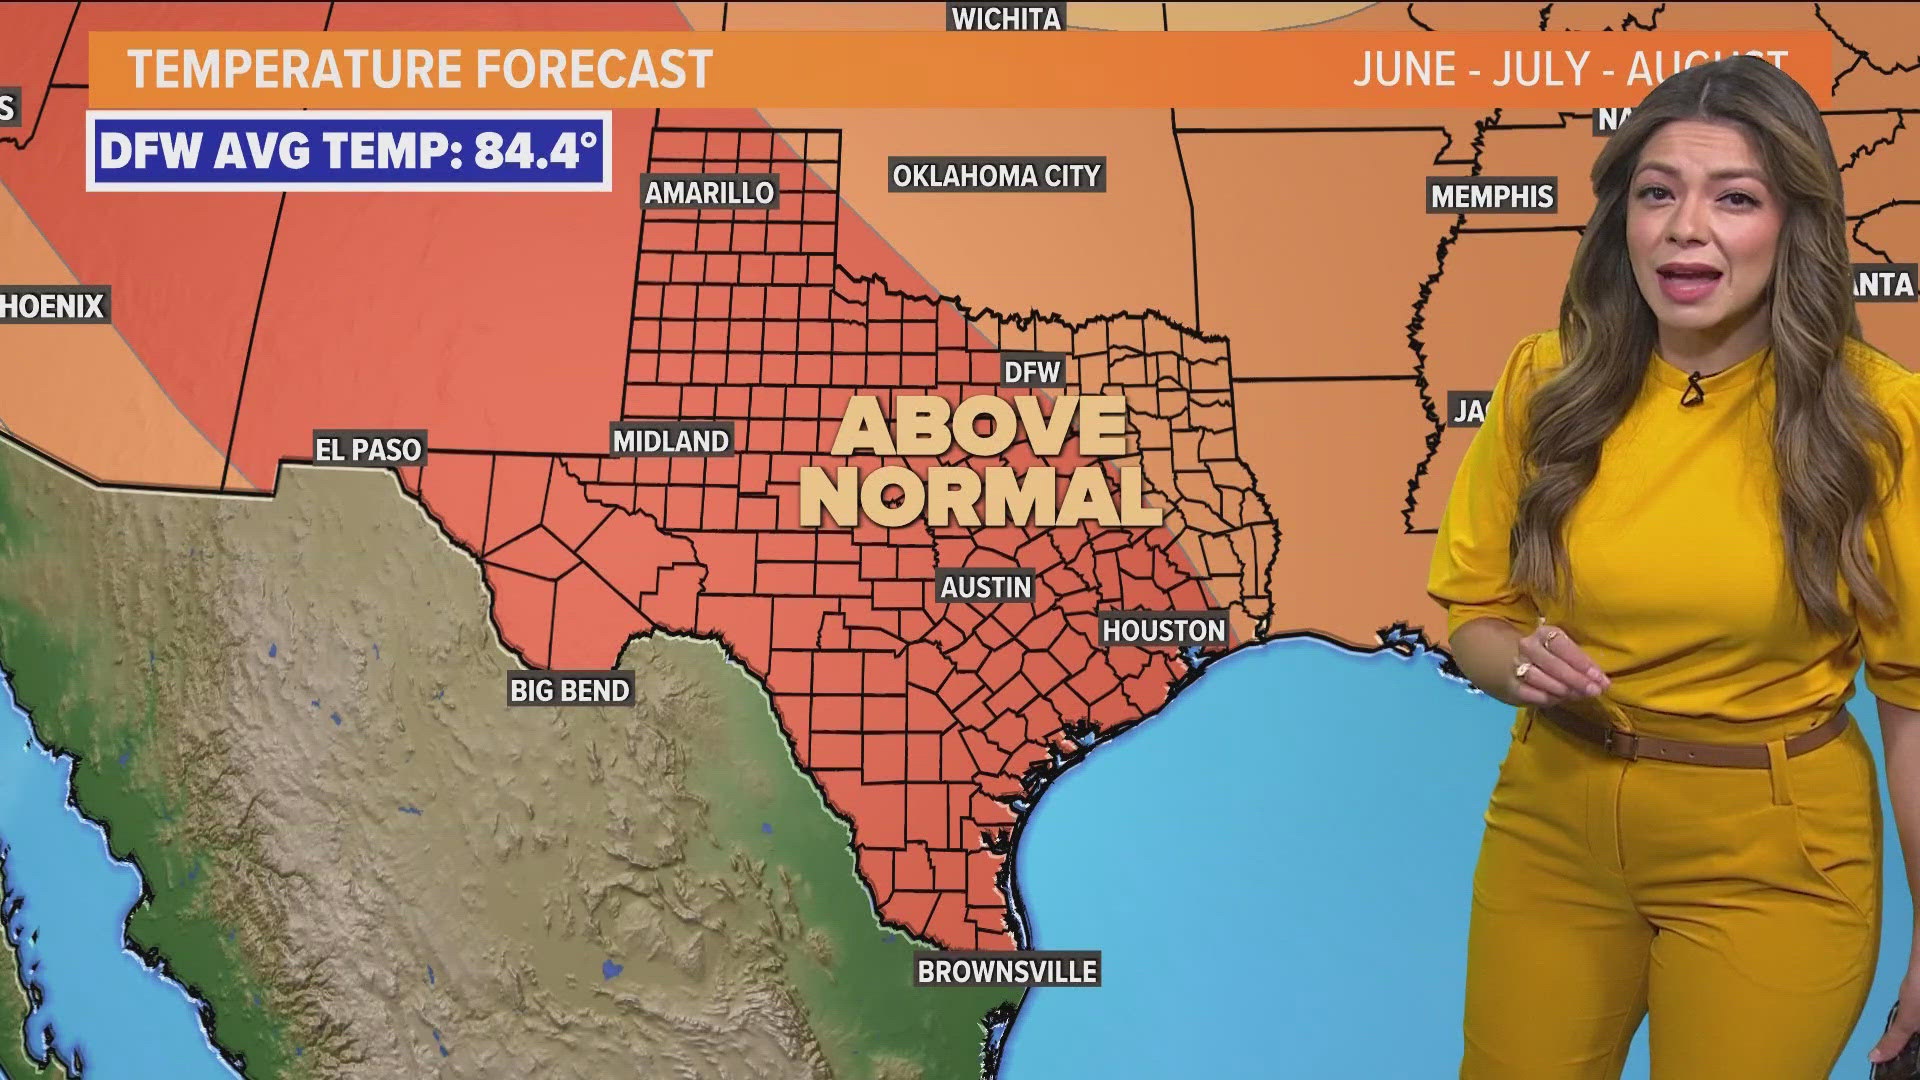 Warmer and drier conditions are expected with El Nino in North Texas this summer.